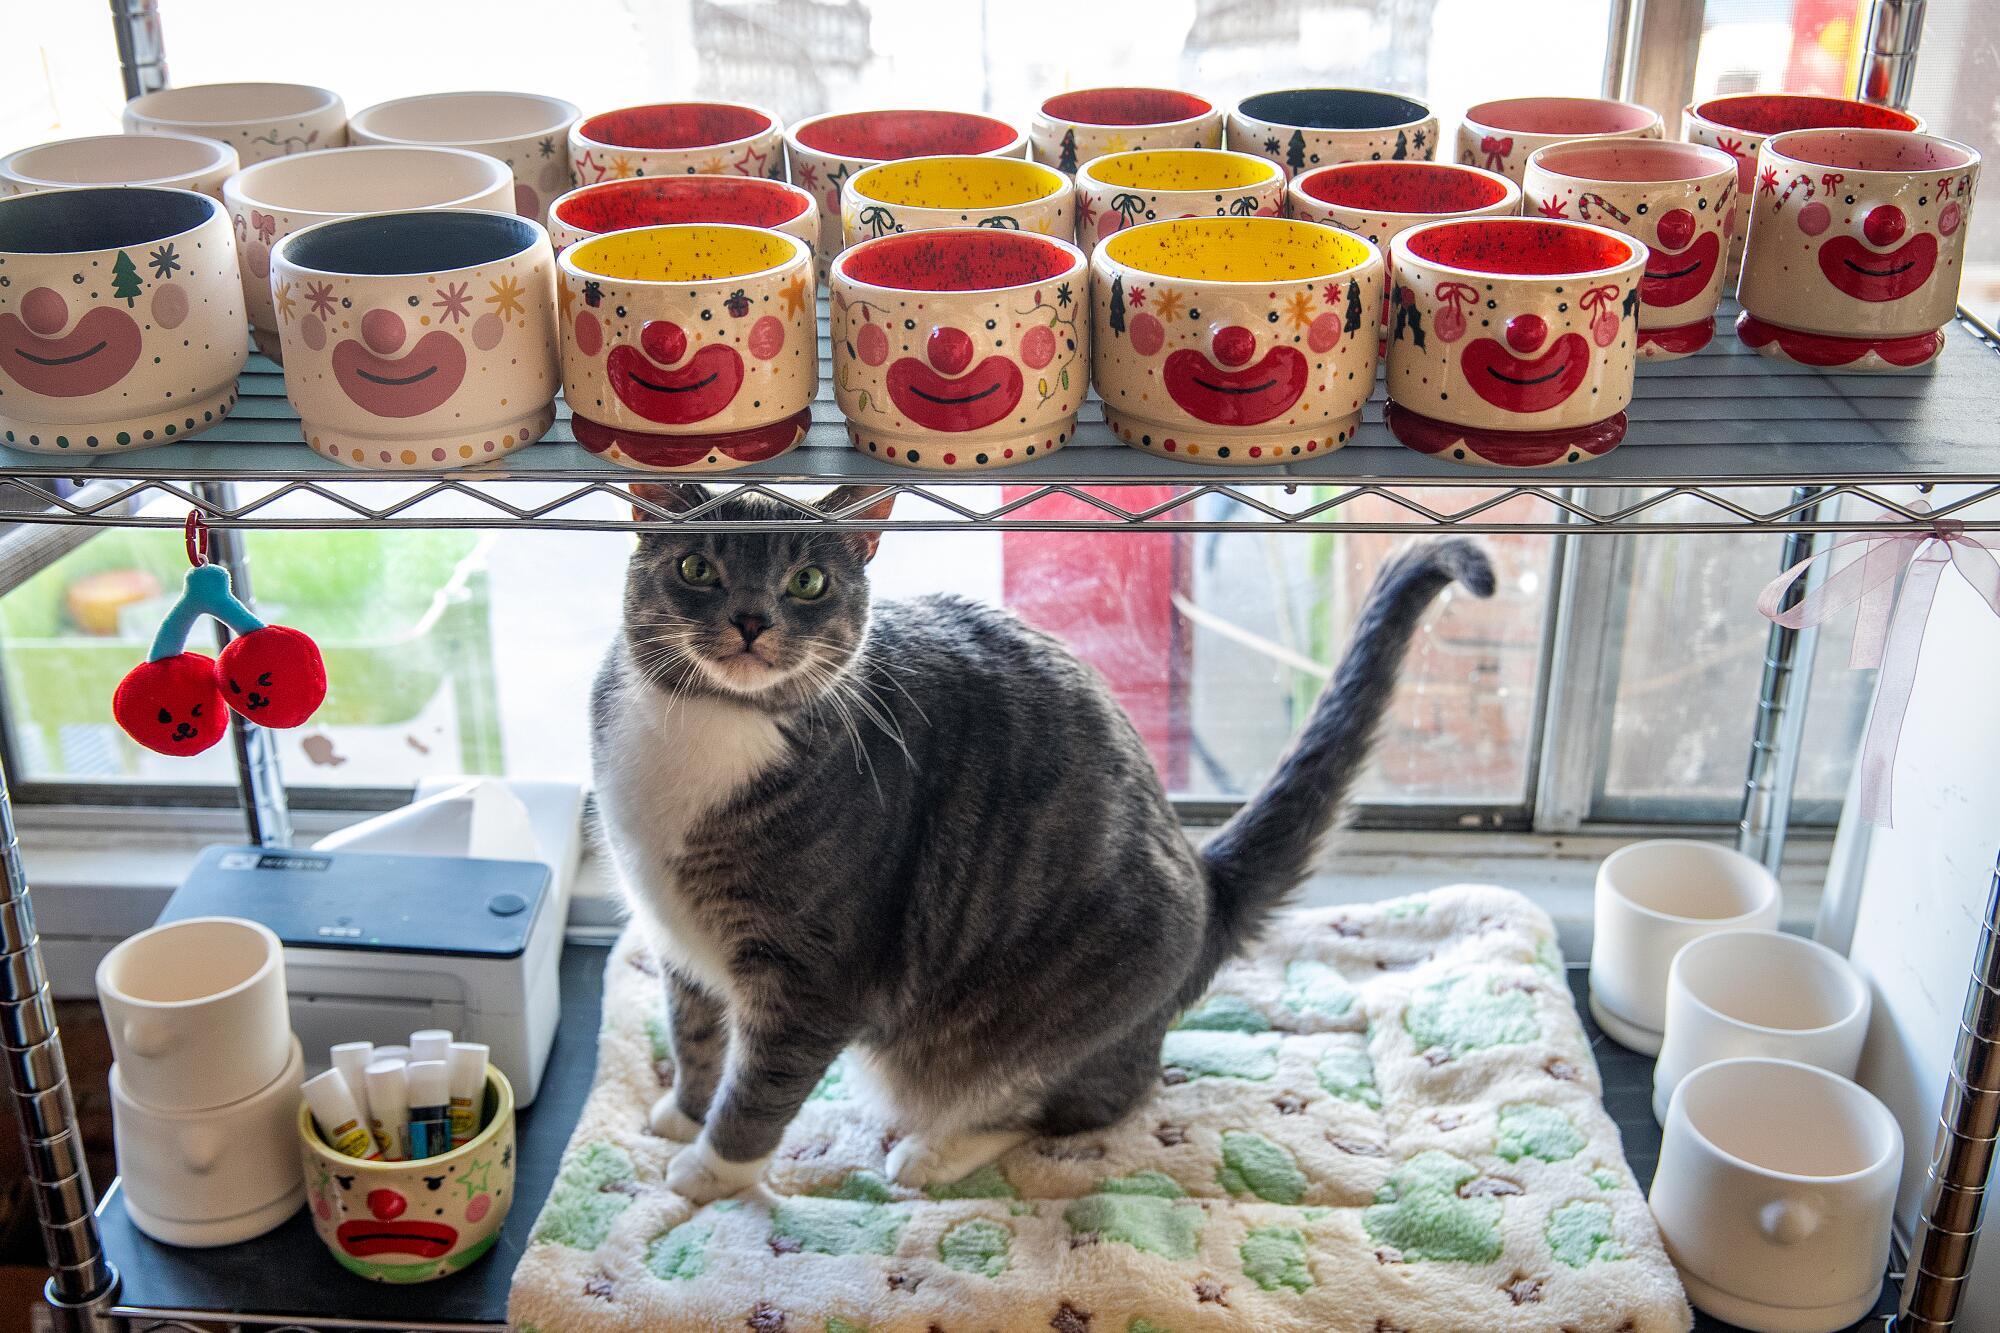 Yoshi, Yousefi's cat, takes a closer look at the cups and bowls.